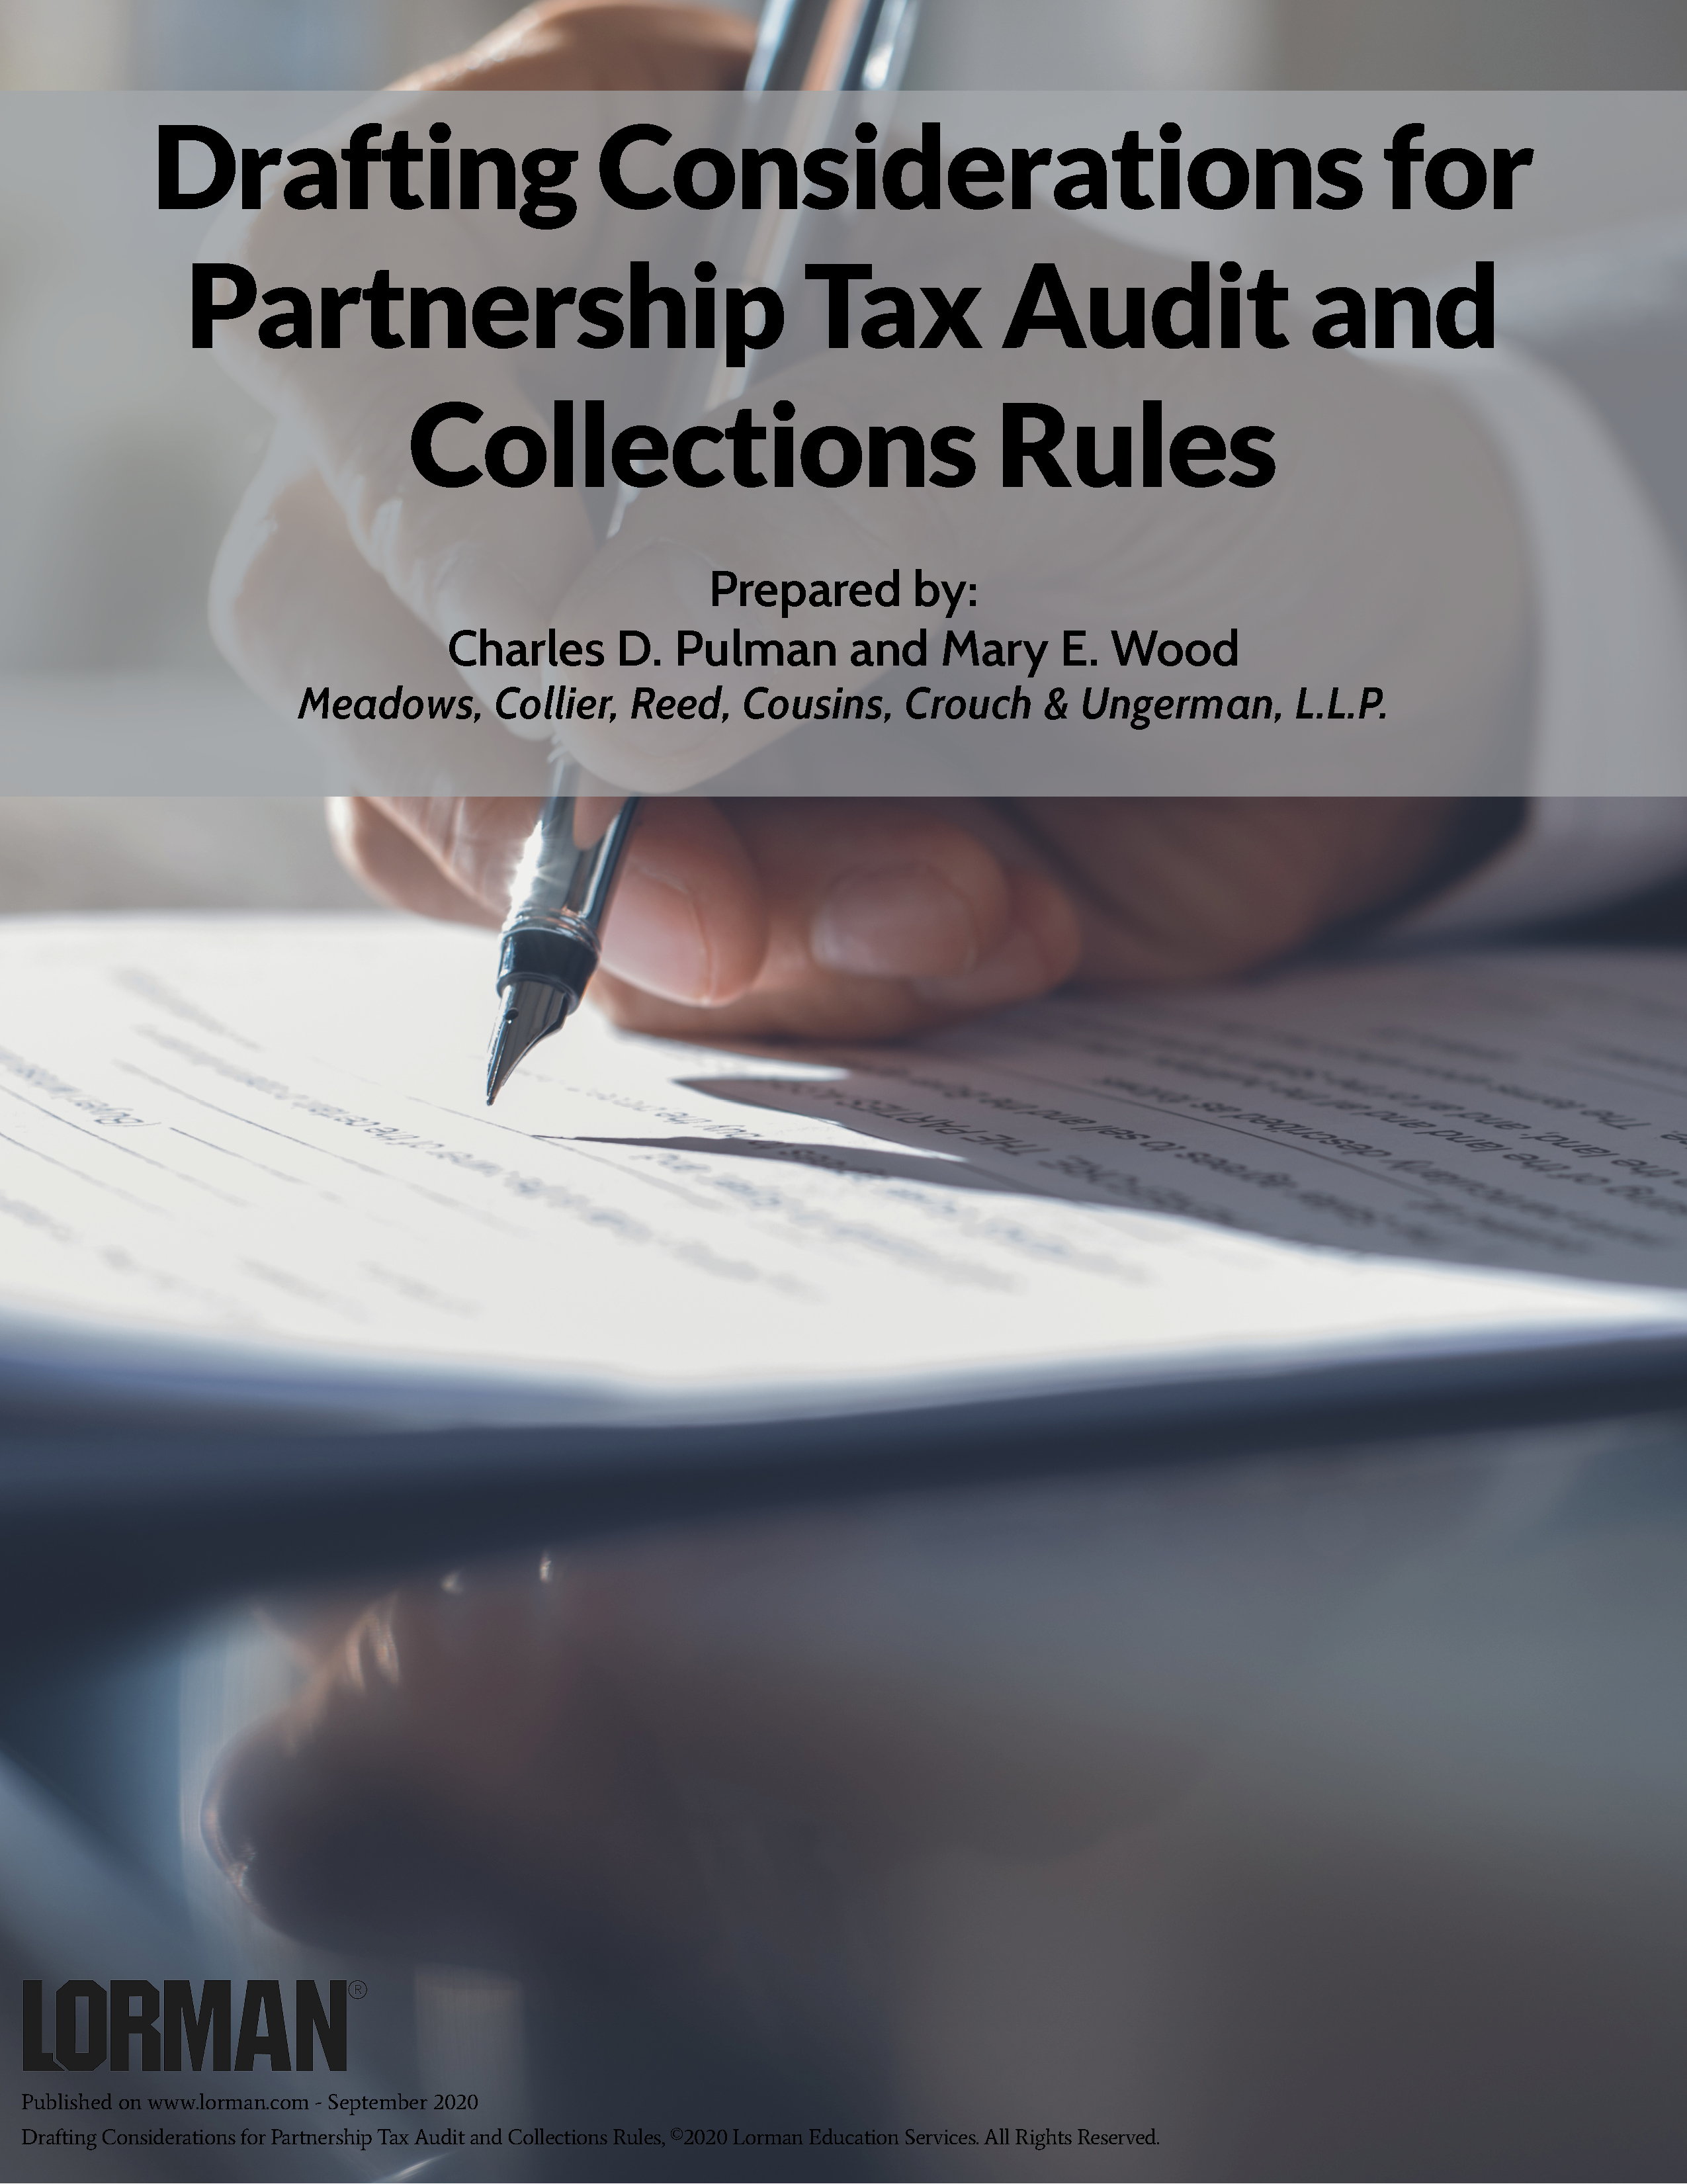 Drafting Considerations for Partnership Tax Audit and Collections Rules